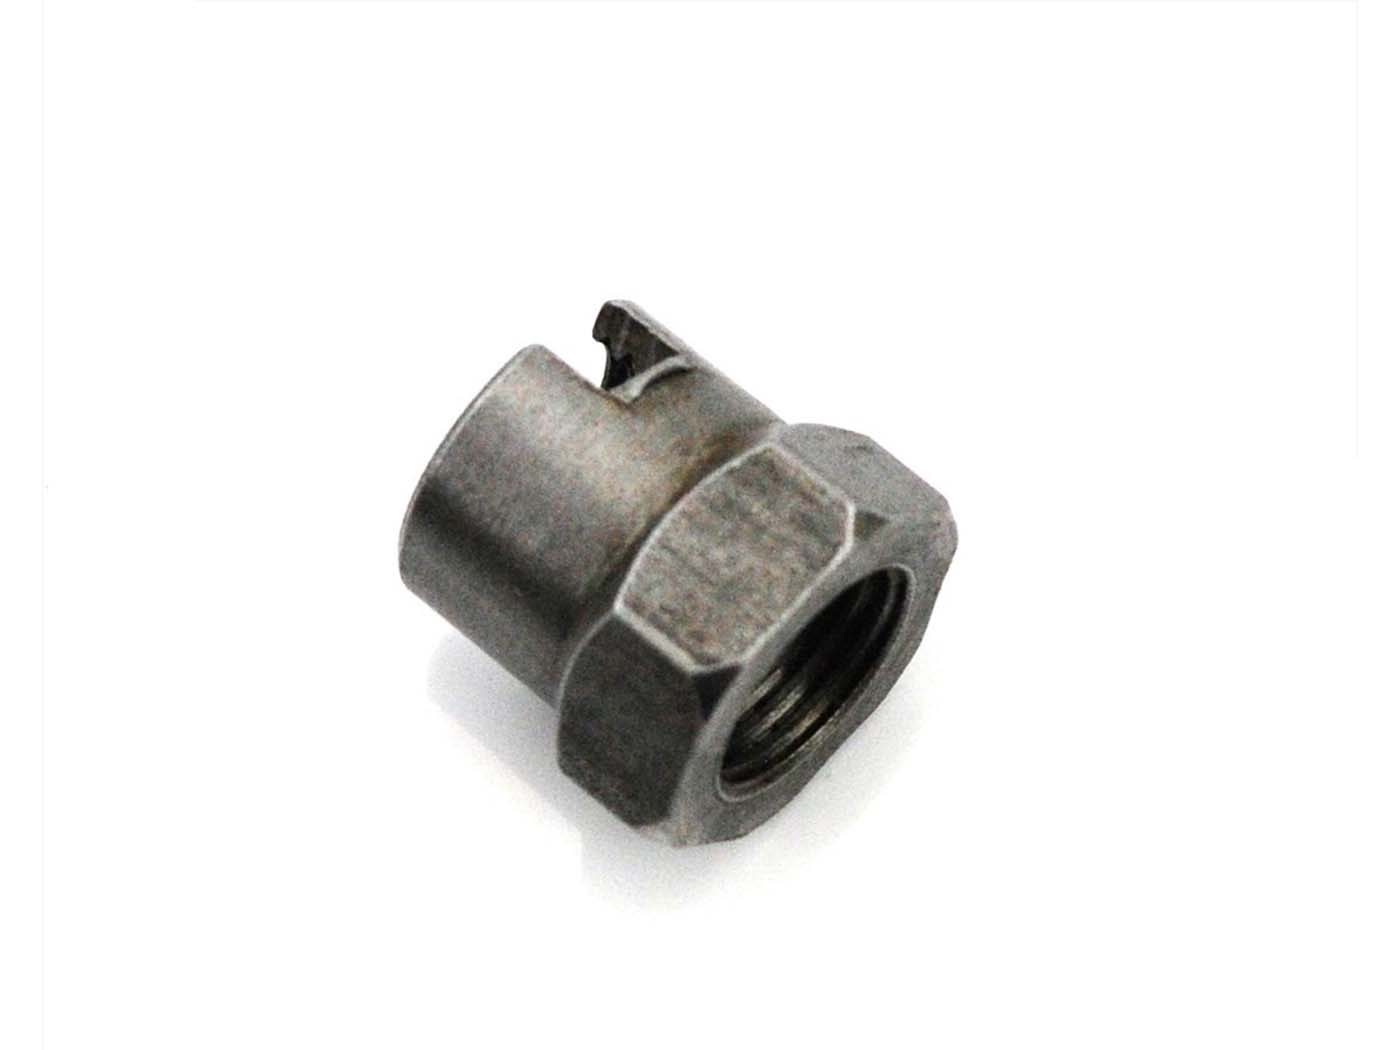 Gearbox Slotted Nut For Moped Moped